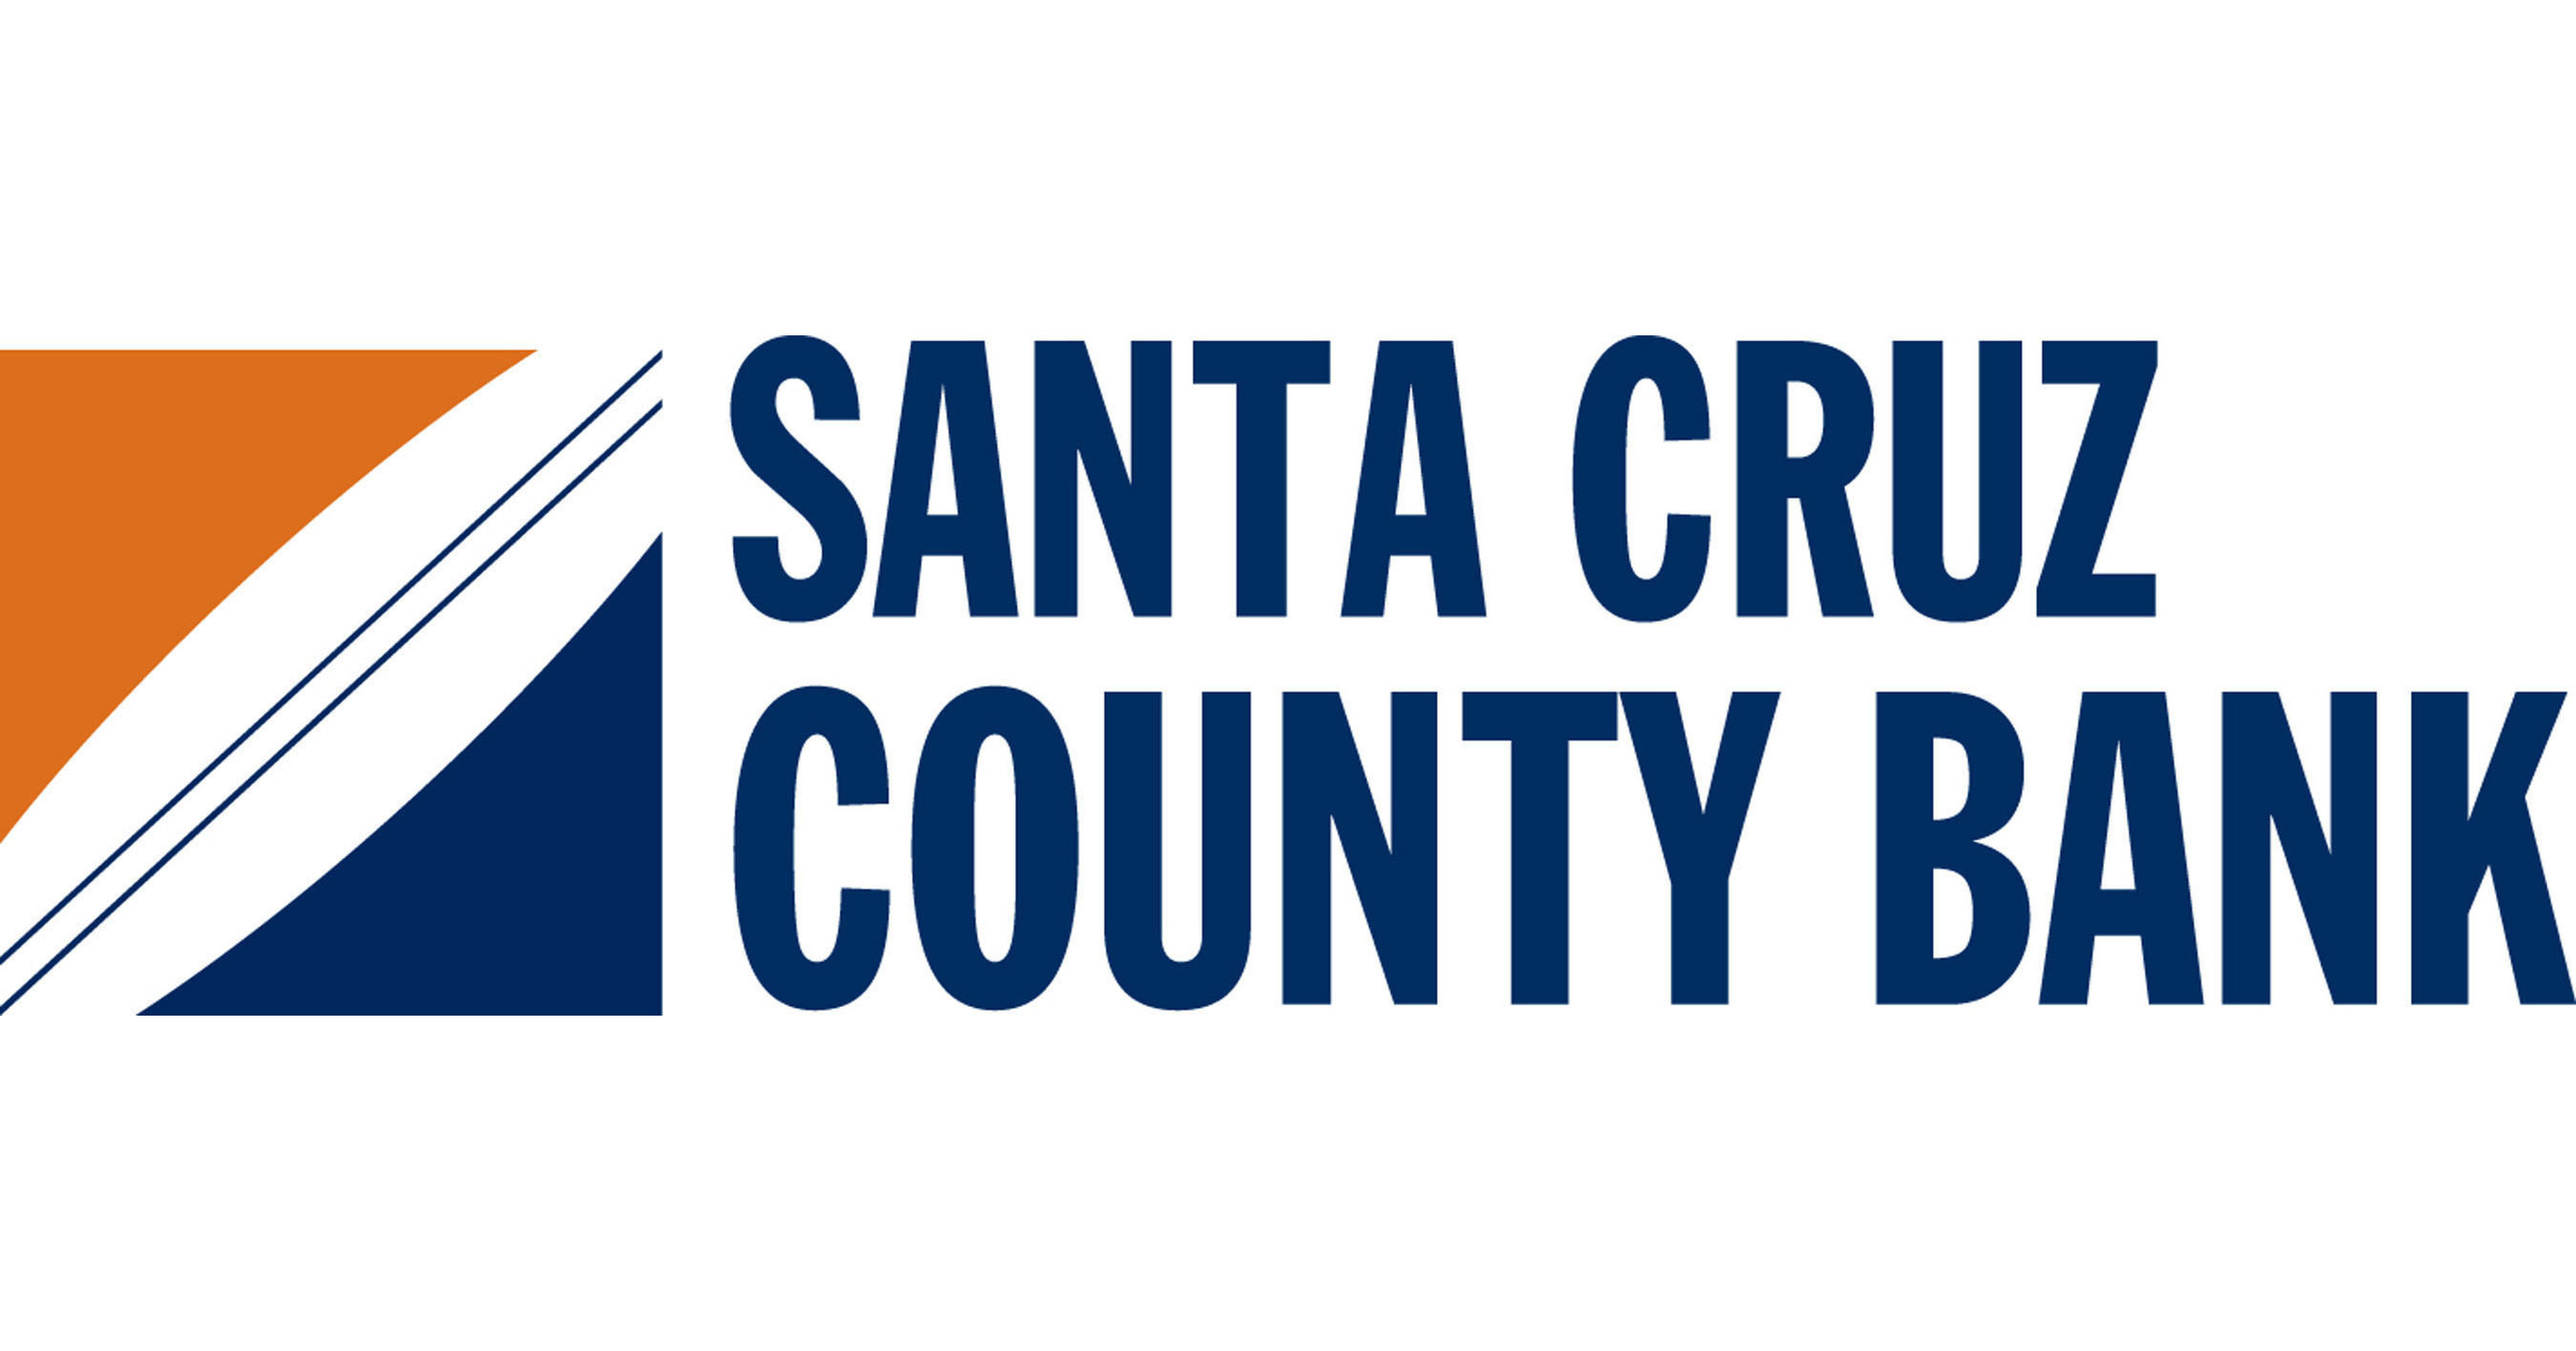 Santa Cruz County Bank Reports Record Earnings For Year Ended December 31, 2020